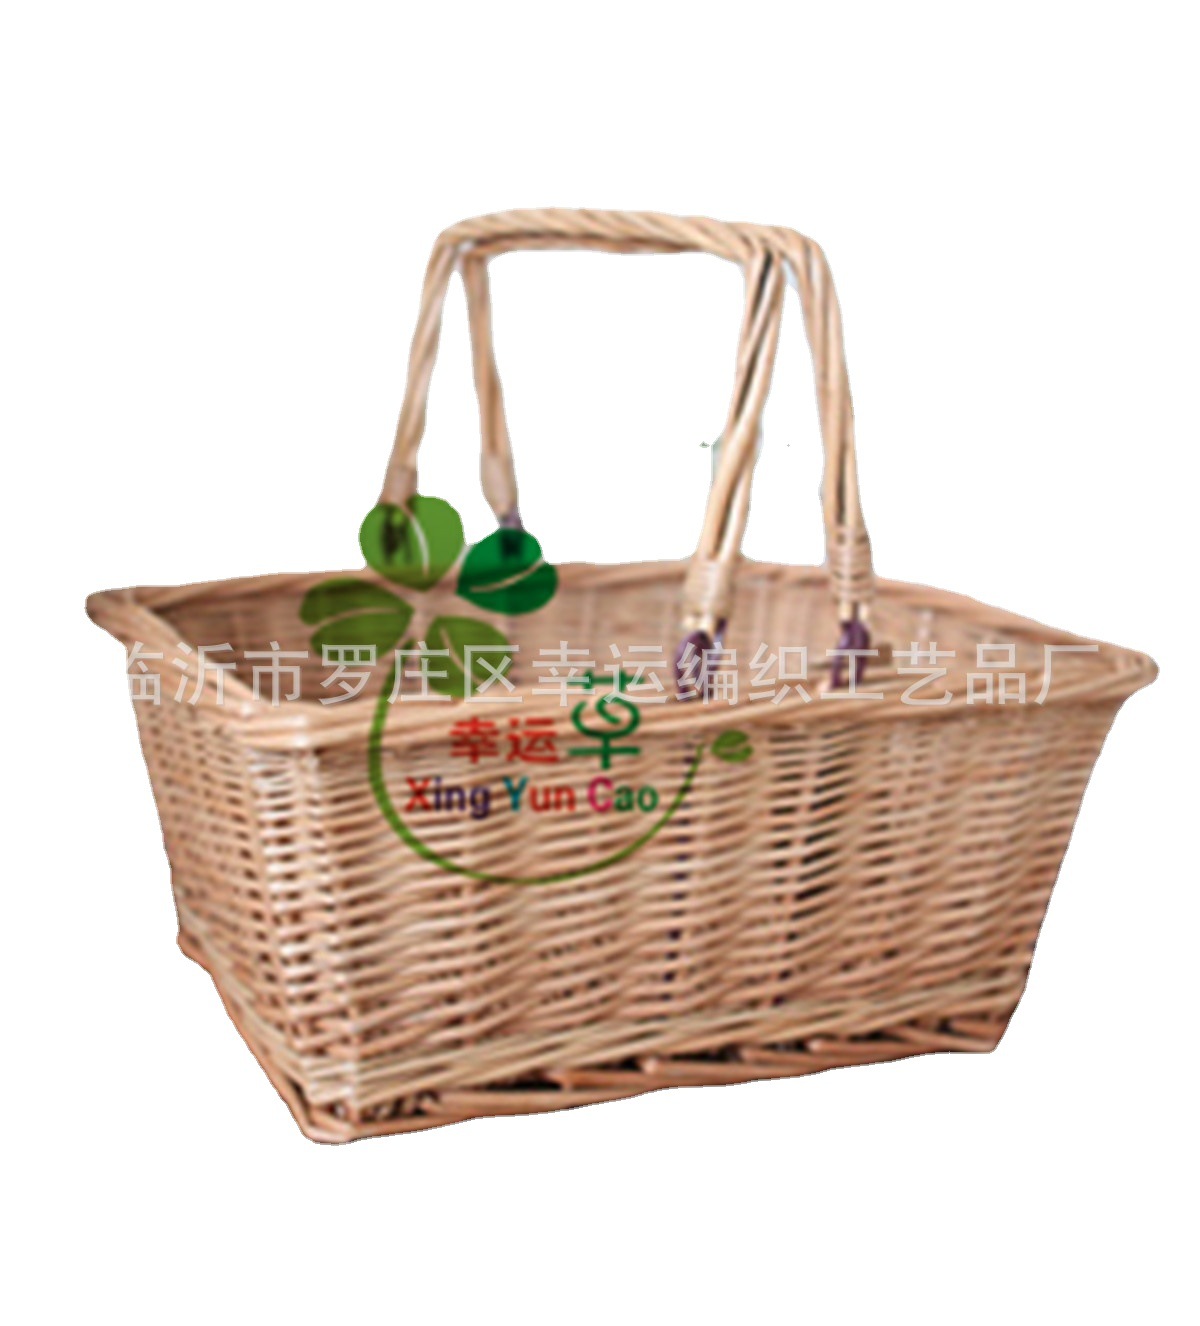 Factory Wholesale Wicker Laundry Basket Hotel Sundries Storage Basket Rattan Including the Lining Cloth Basket